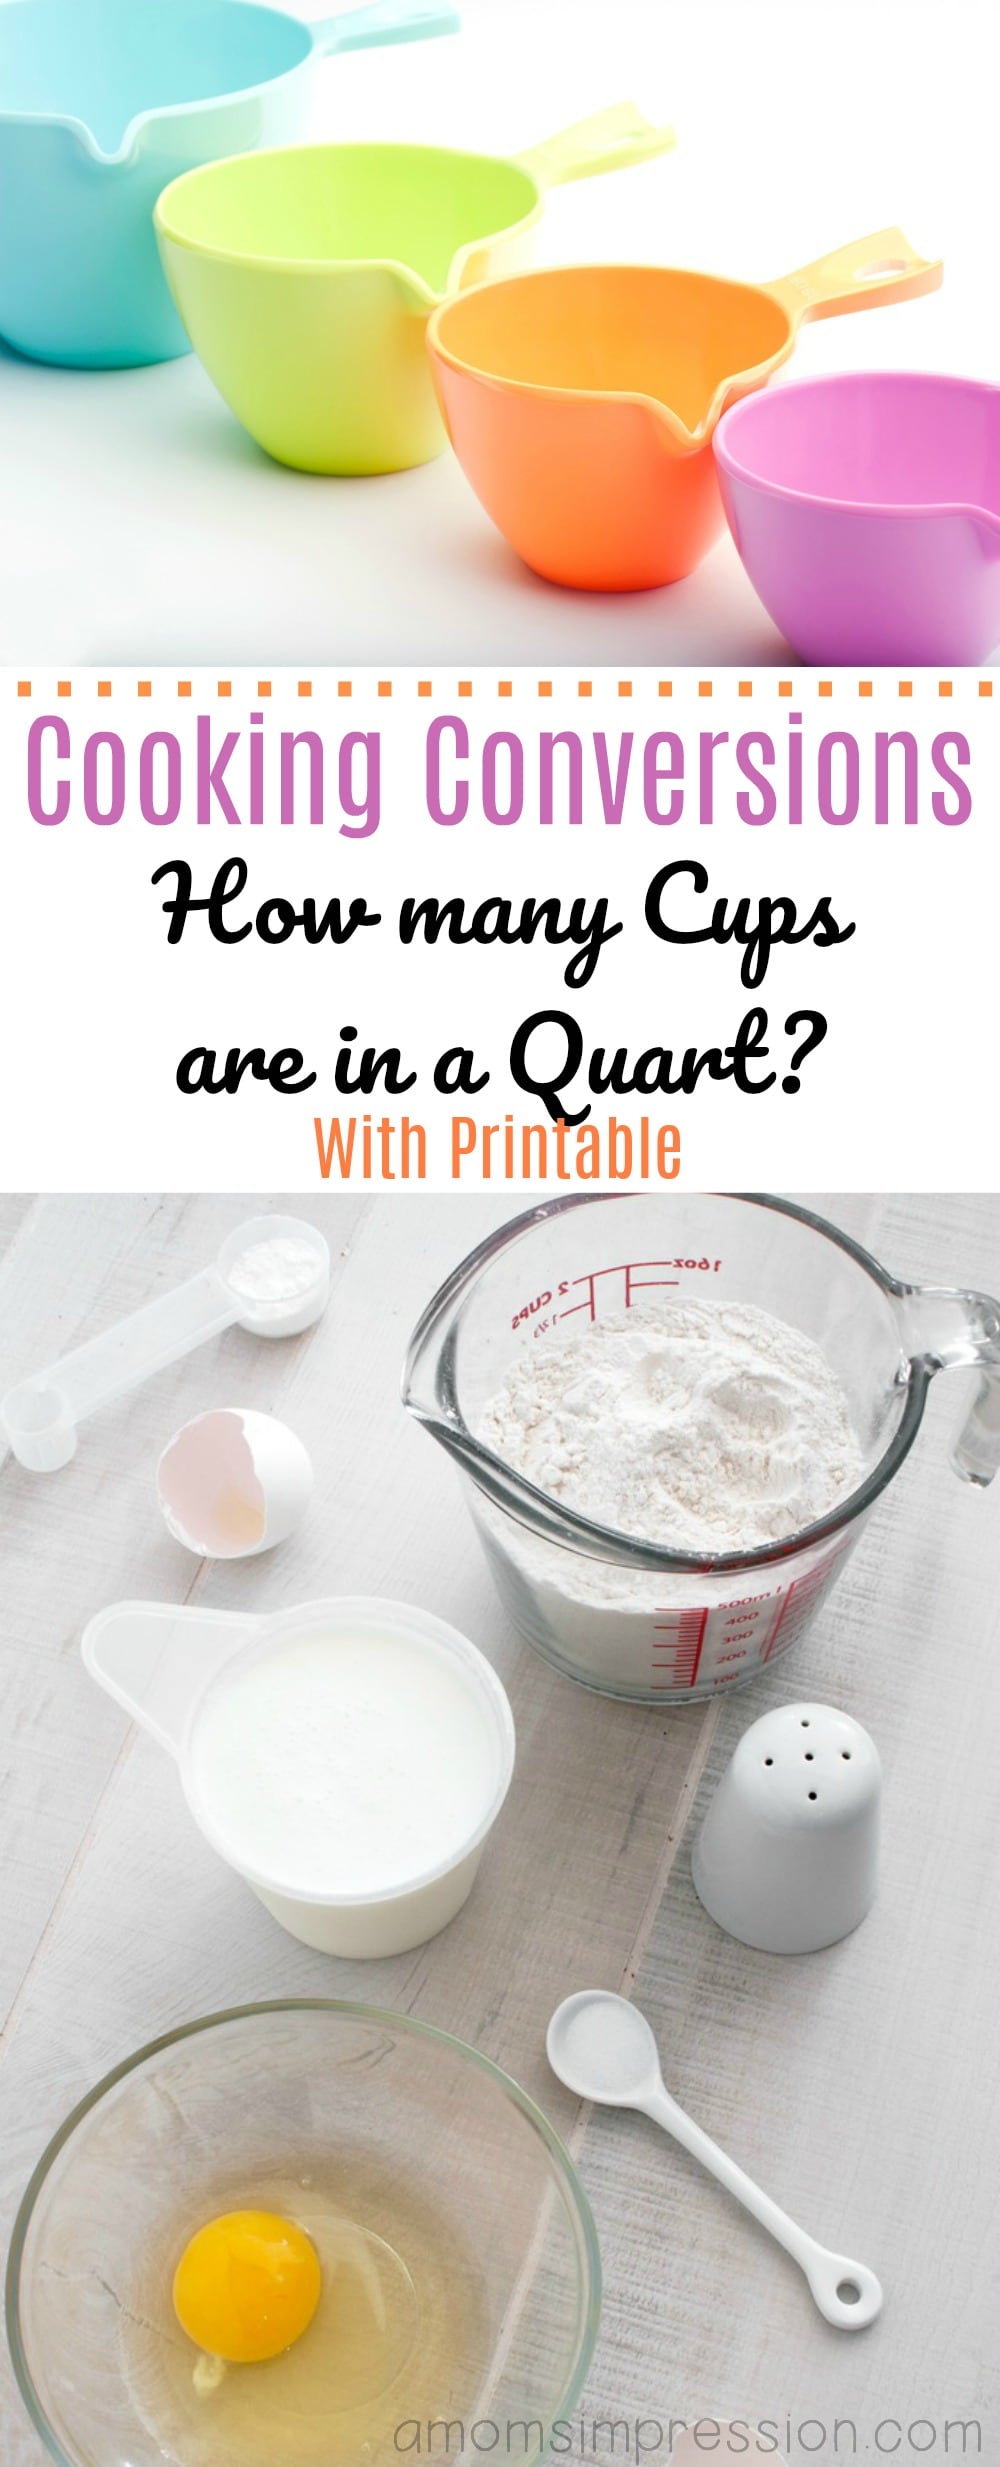 Cooking Conversions